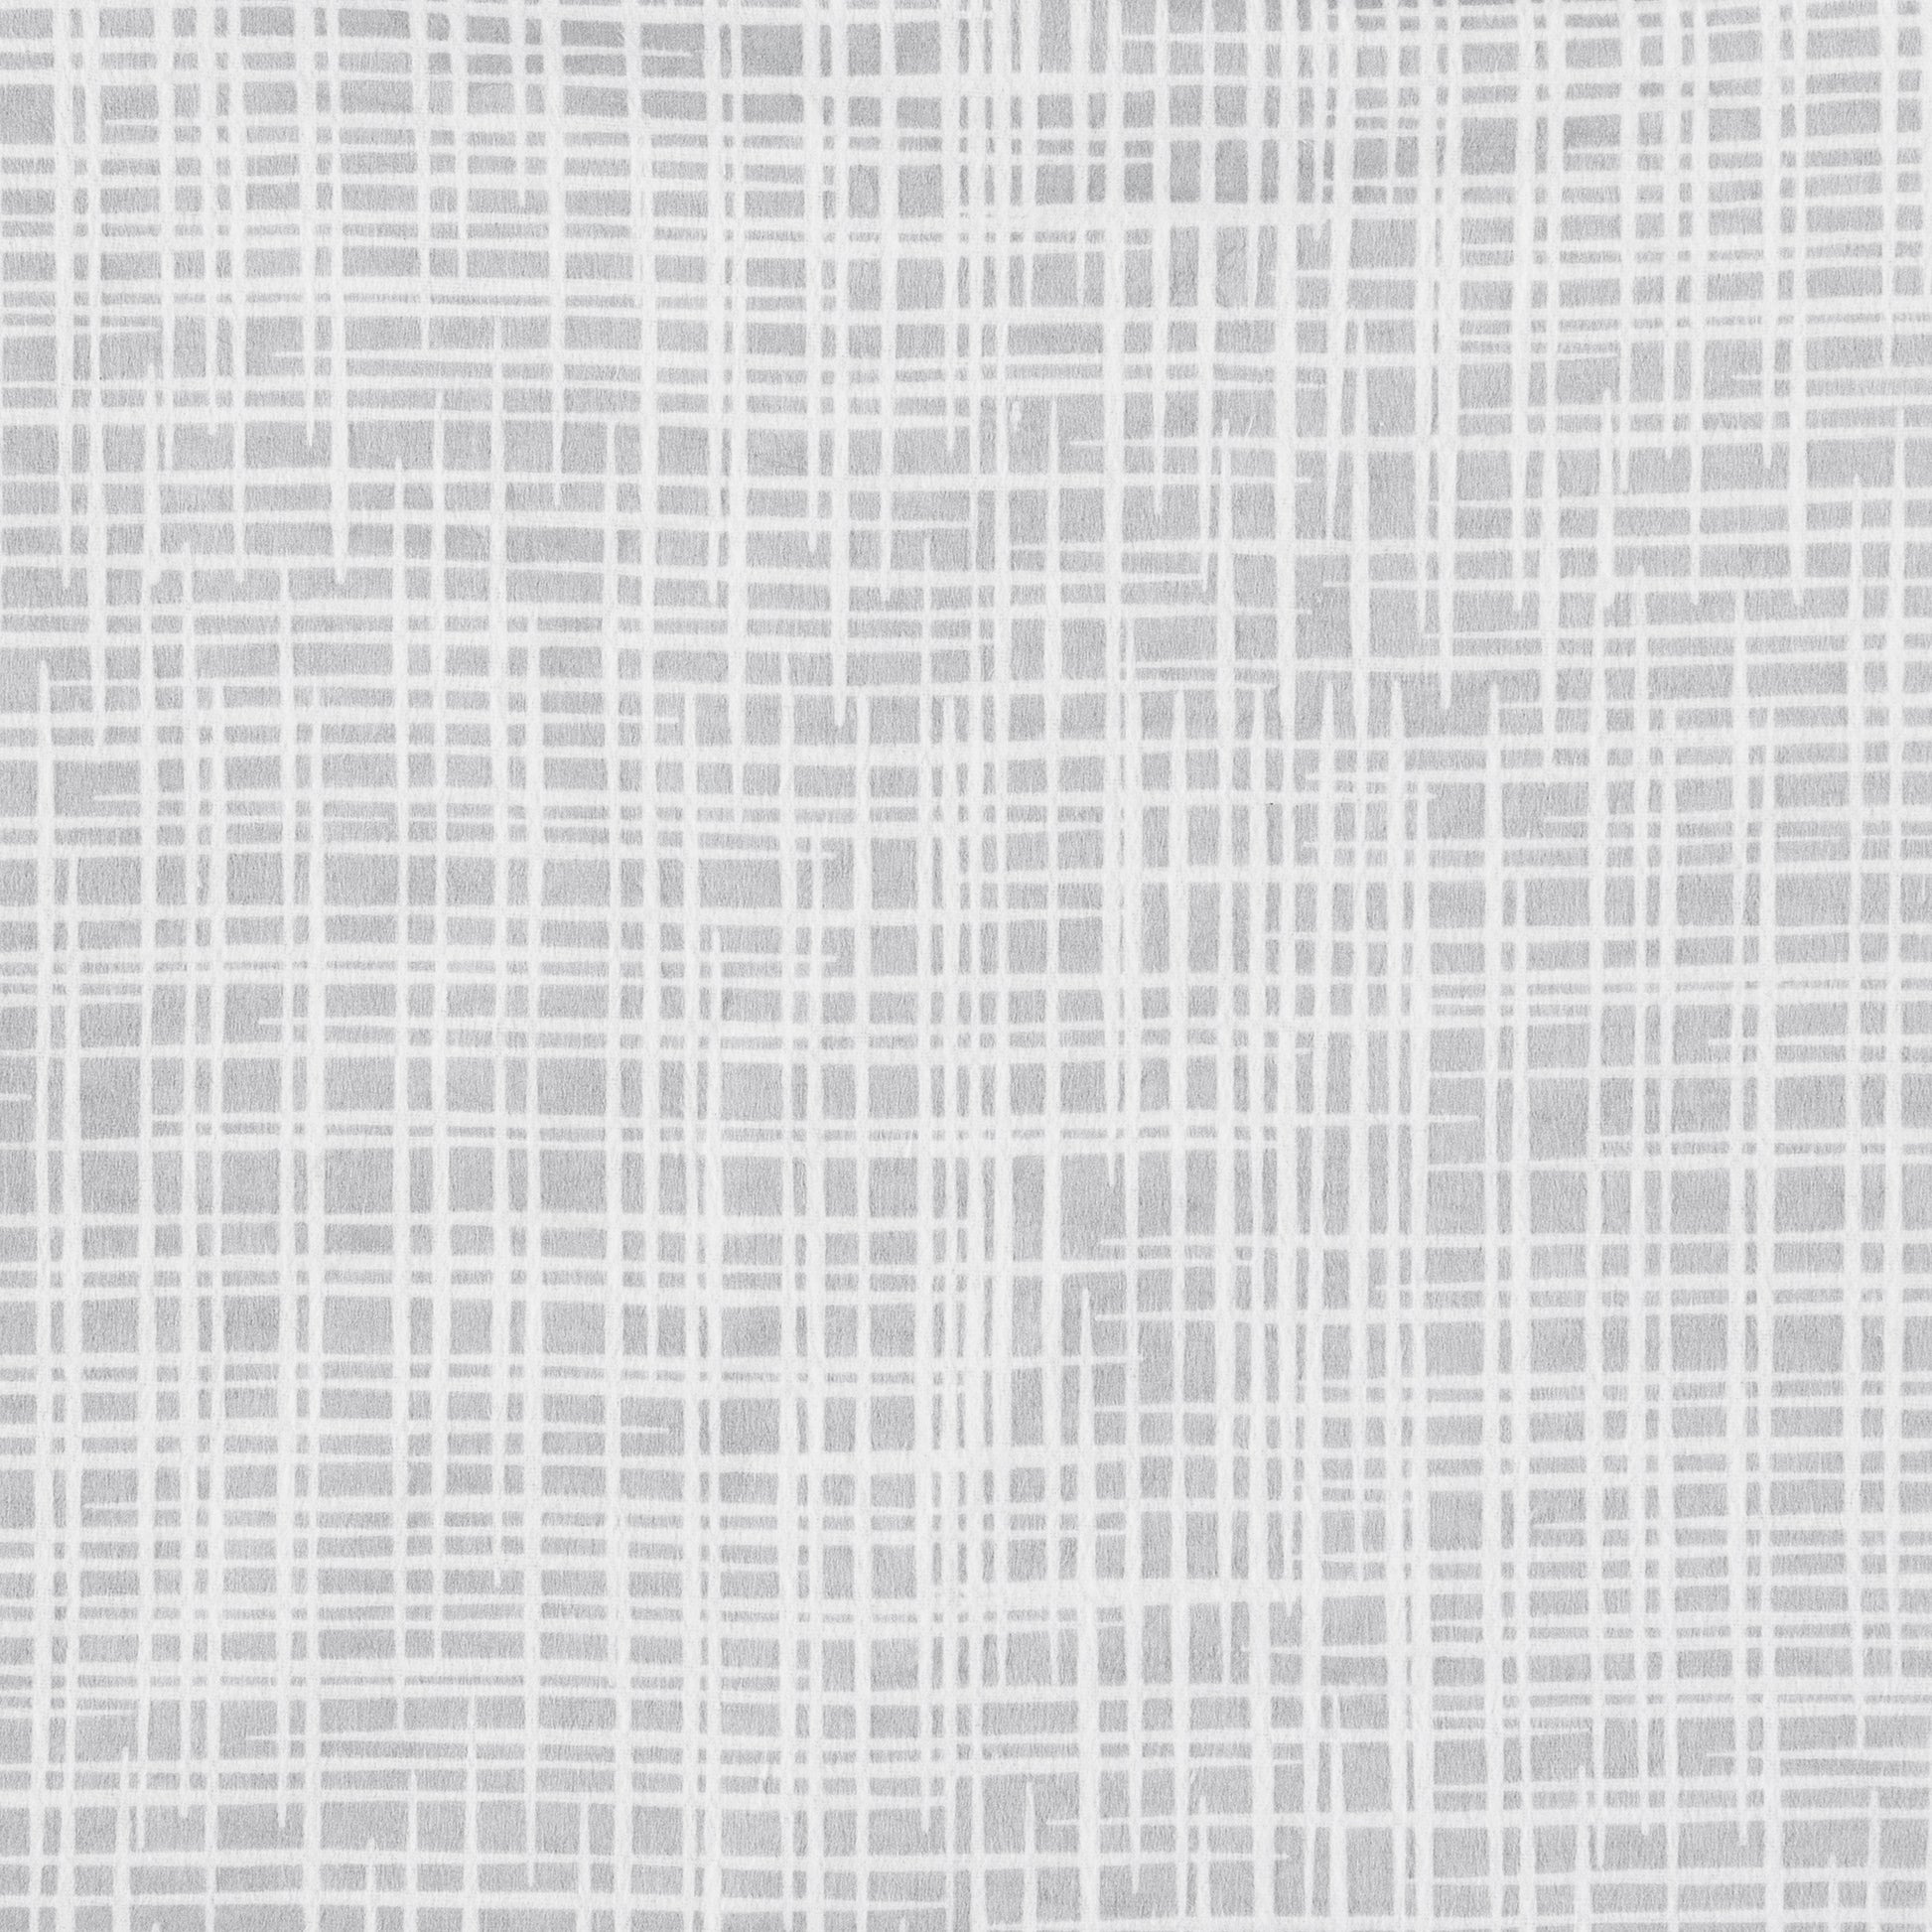  Criss Cross Deluxe Flannel Fitted Crib Sheet - swatch view